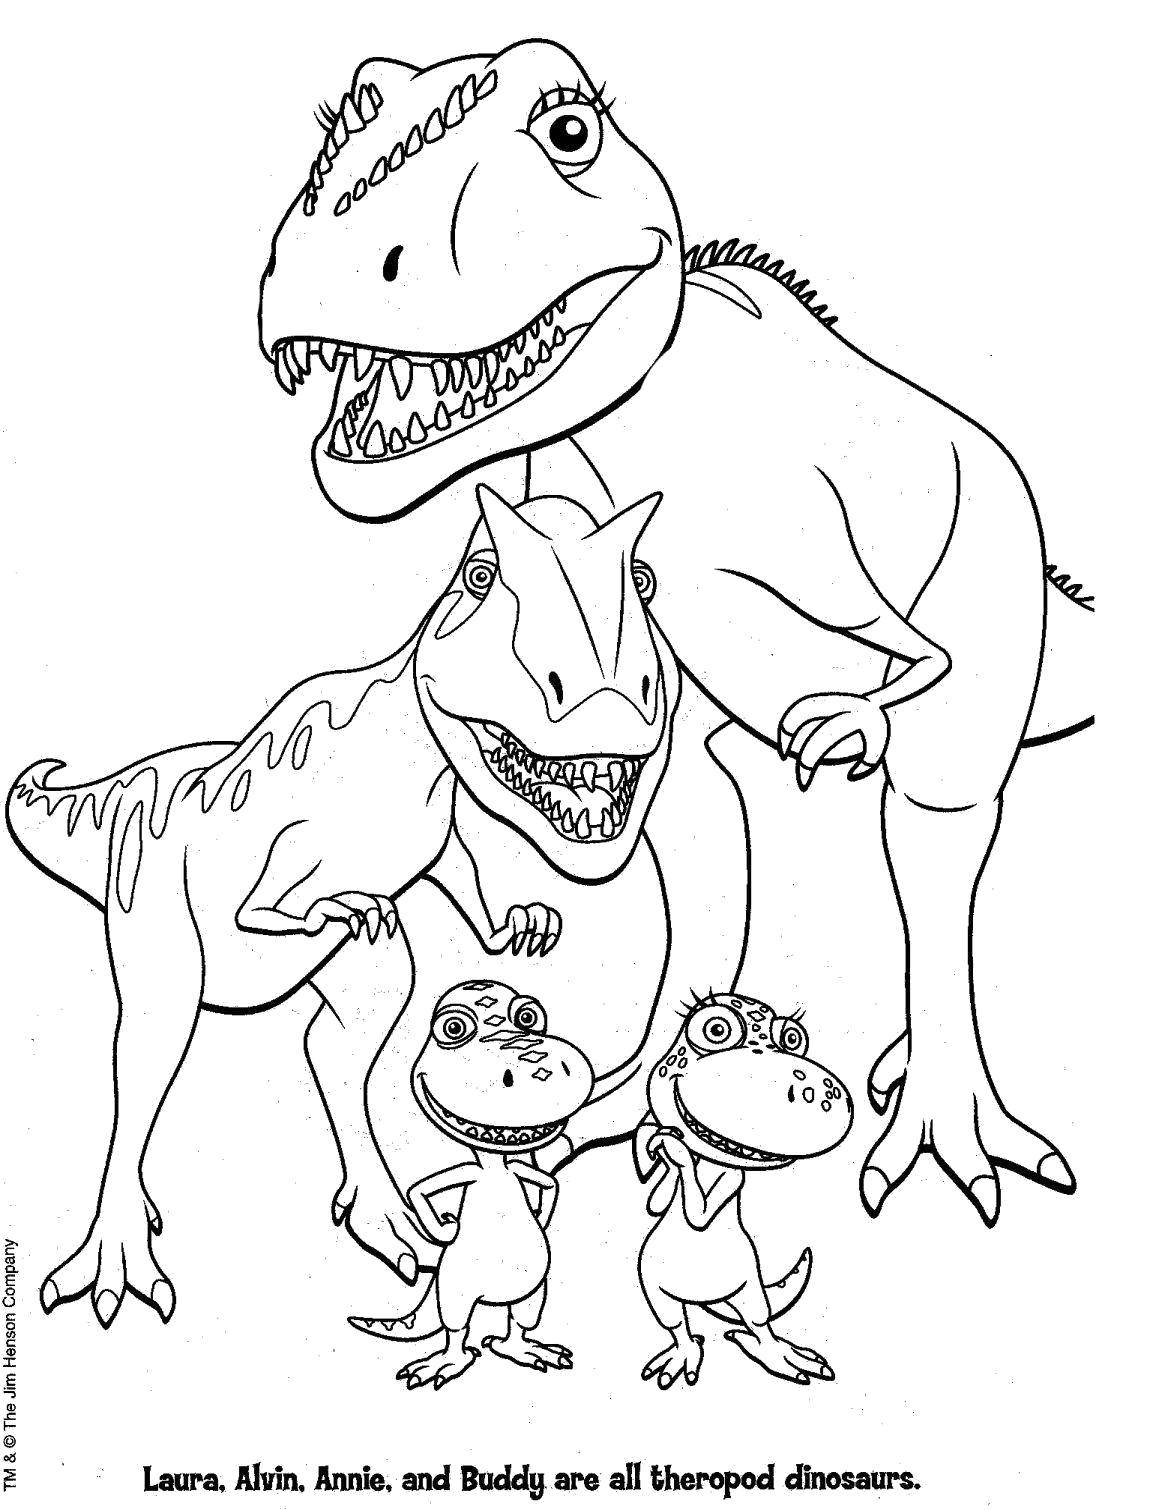 Coloring Laura, Alvin, Annie and buddy. Category dinosaur. Tags:  Dinosaurs.